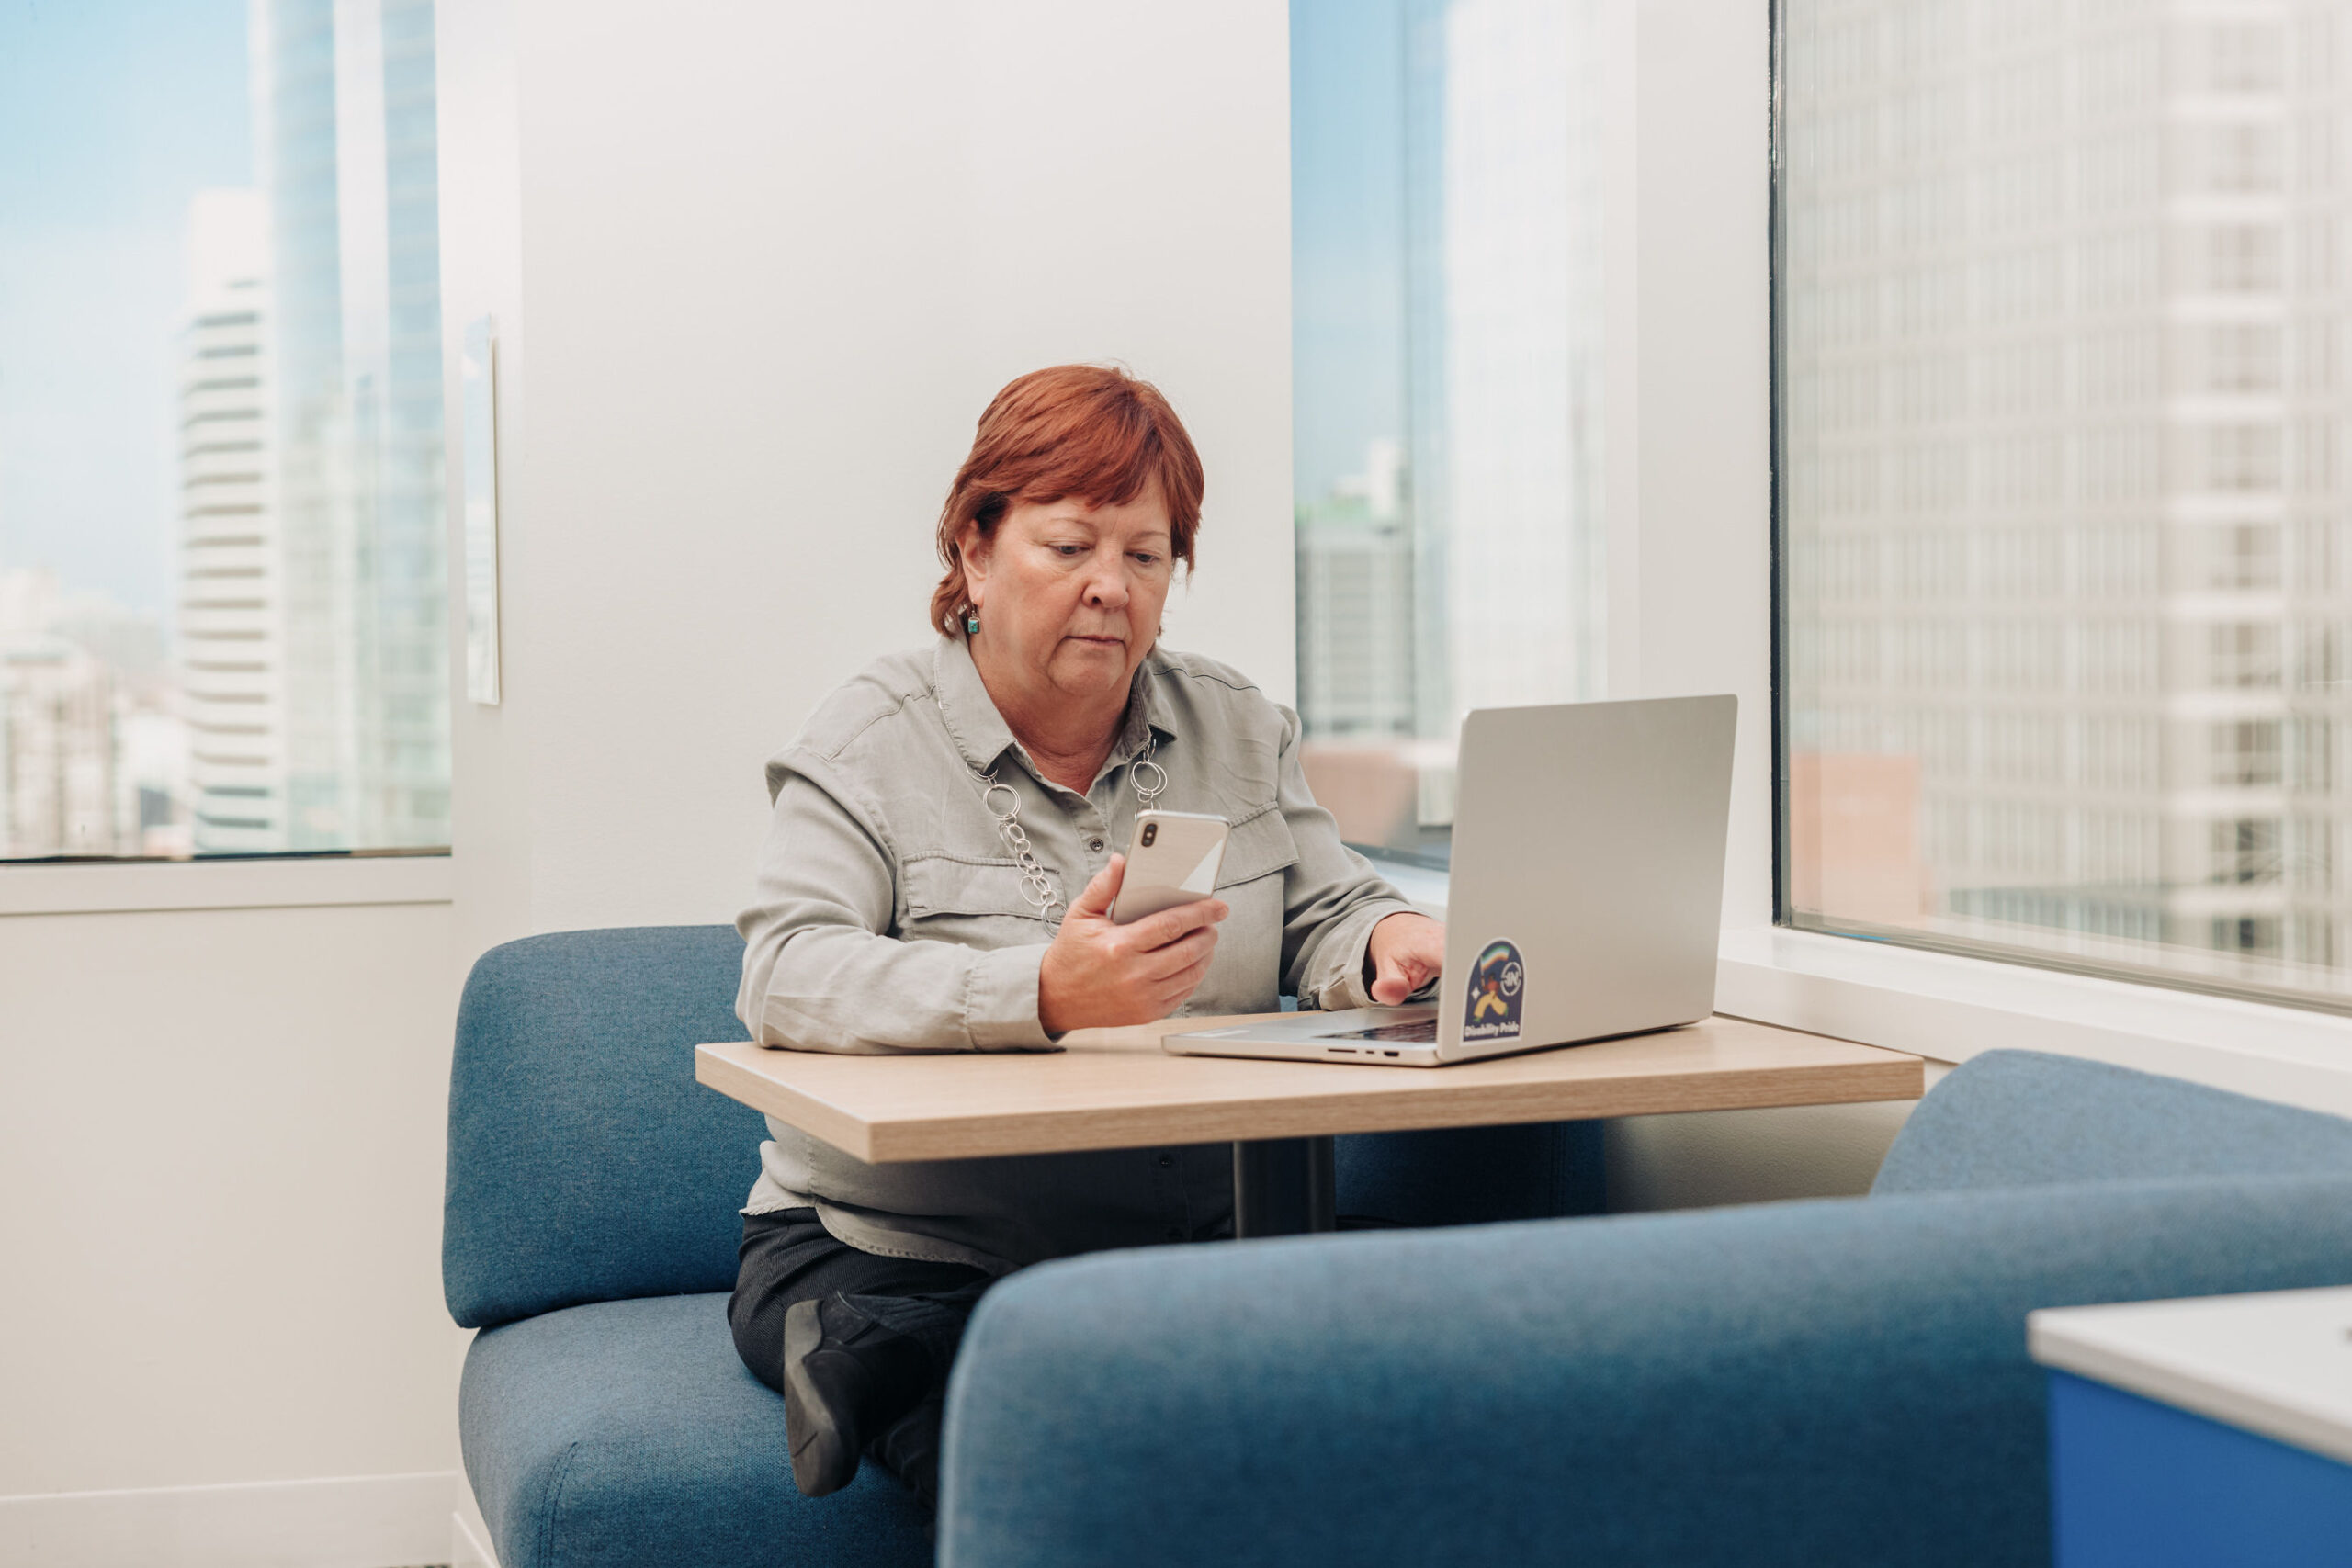 An older woman works in an office on her laptop. She holds a phone in her other hand.